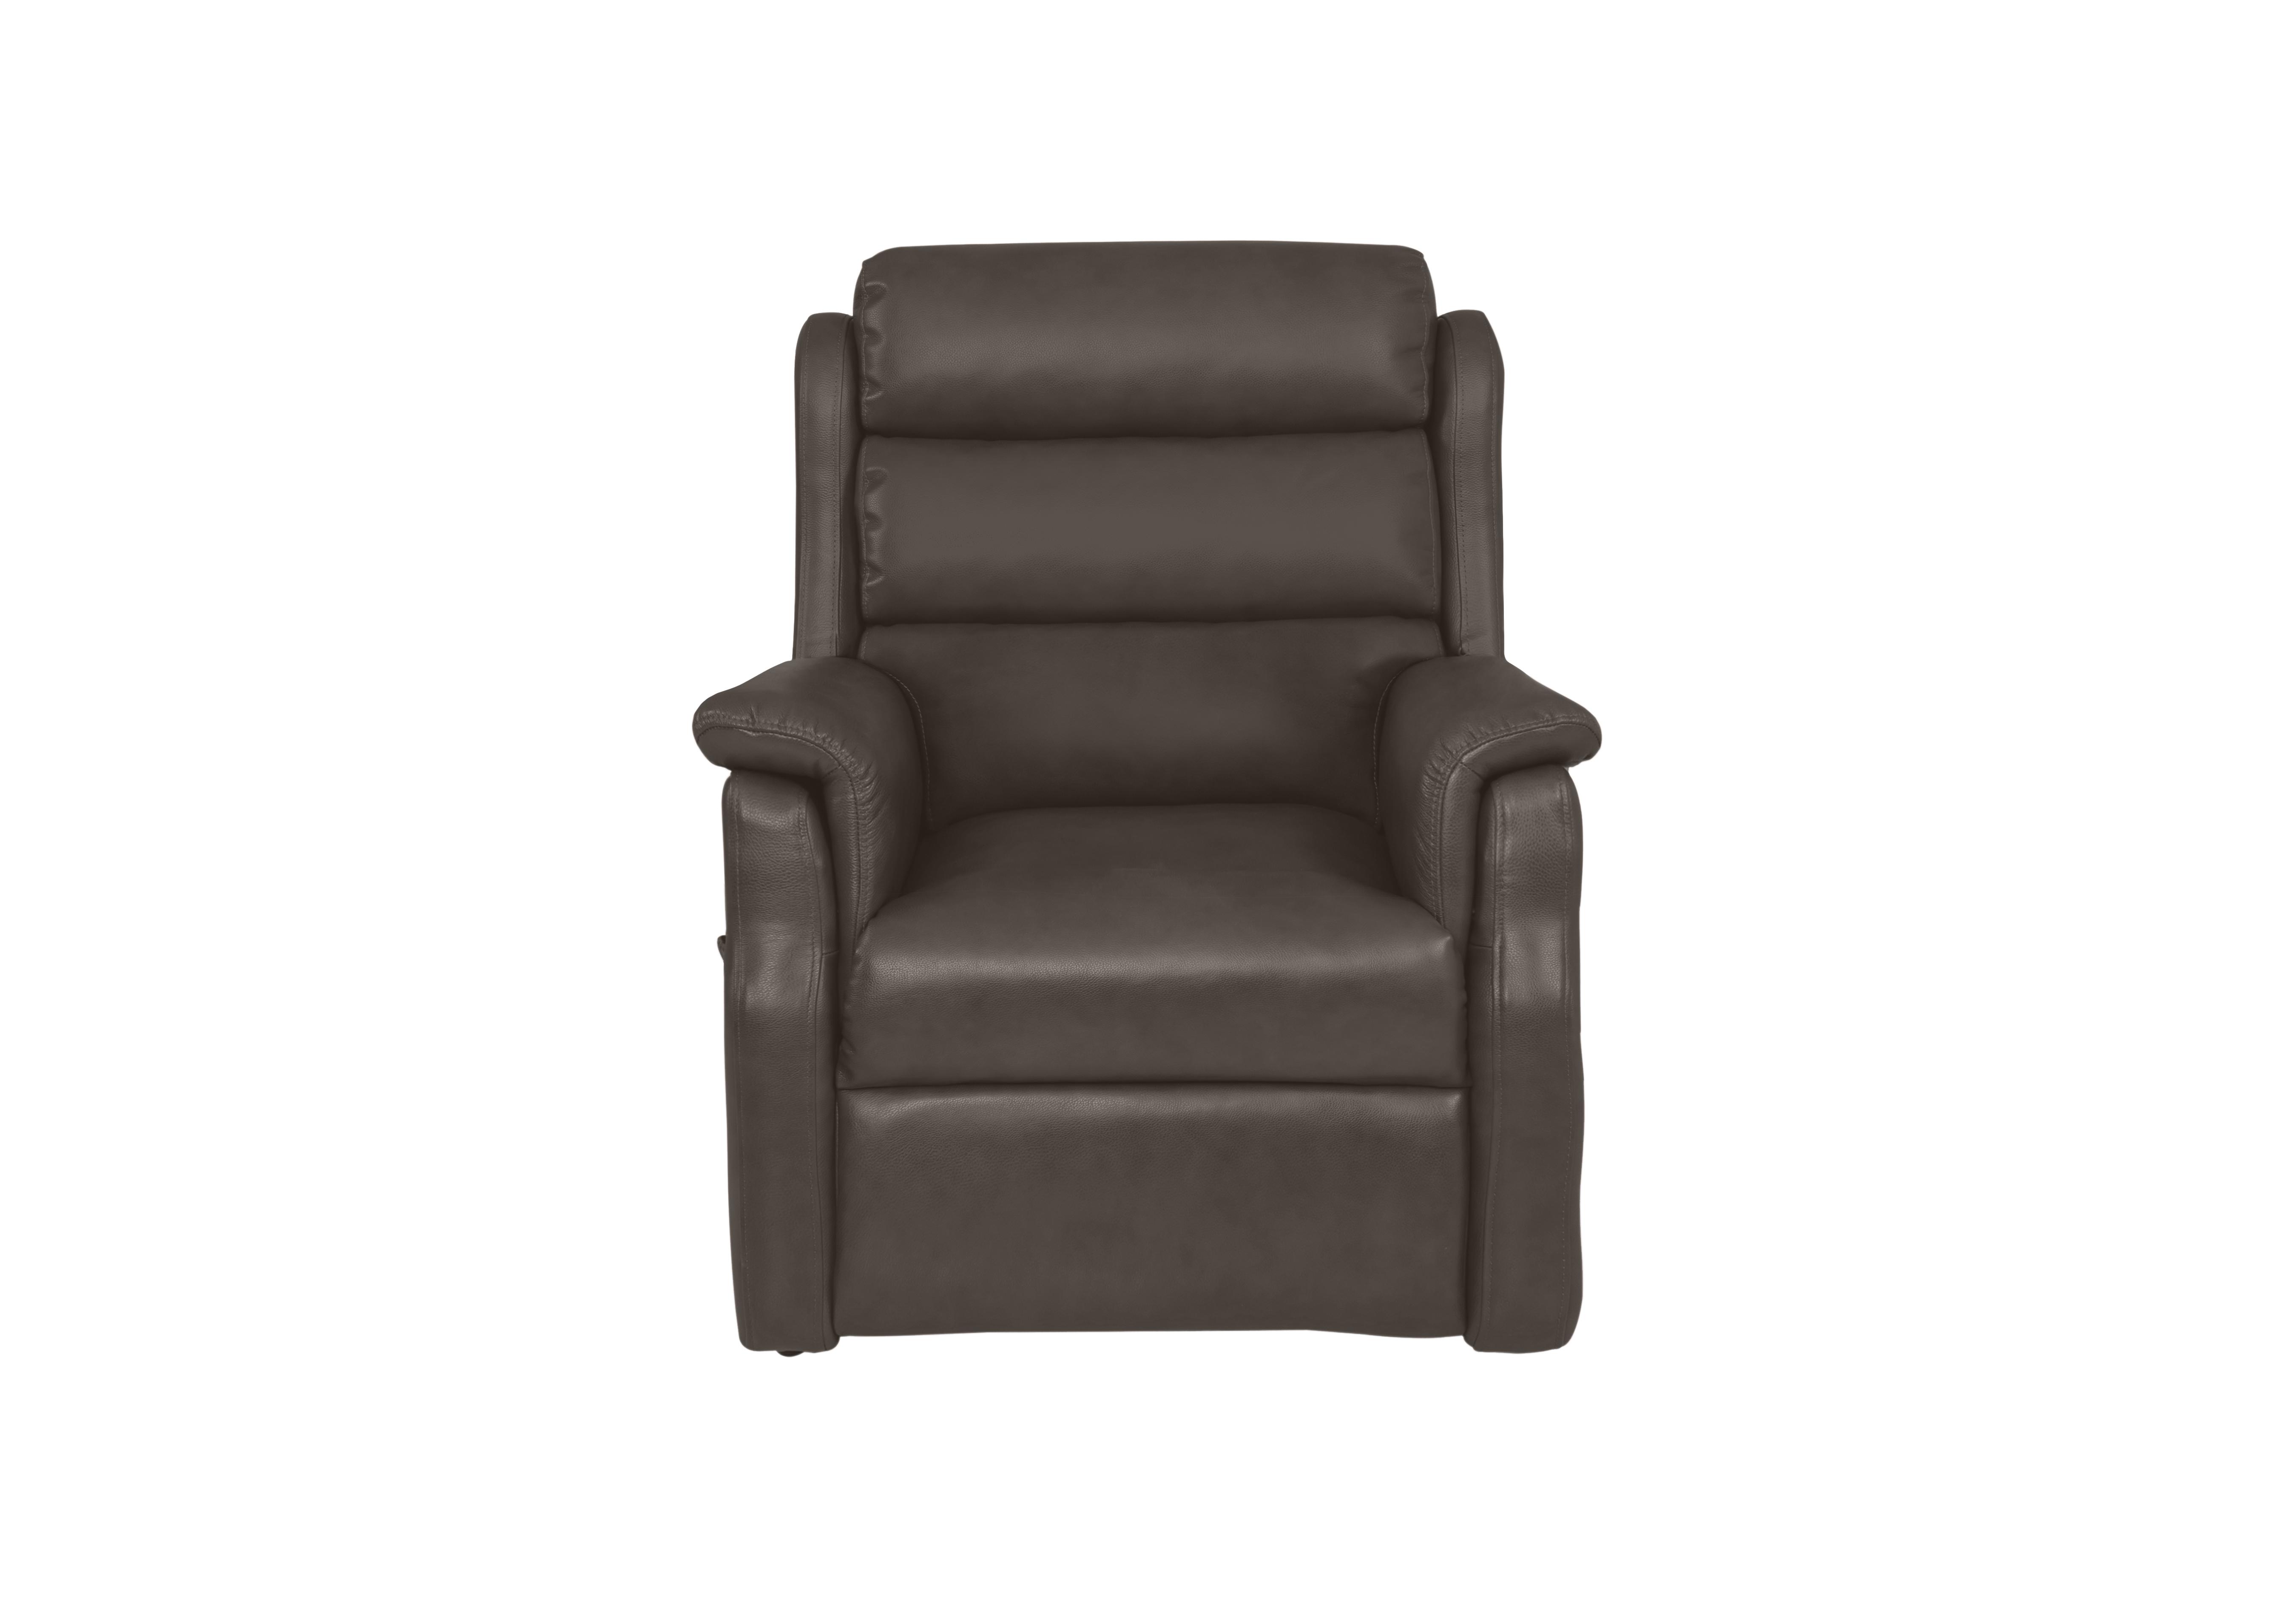 My Chair McCoy Leather Lift and Rise Chair in Cat-60/21 Montana Storm on Furniture Village